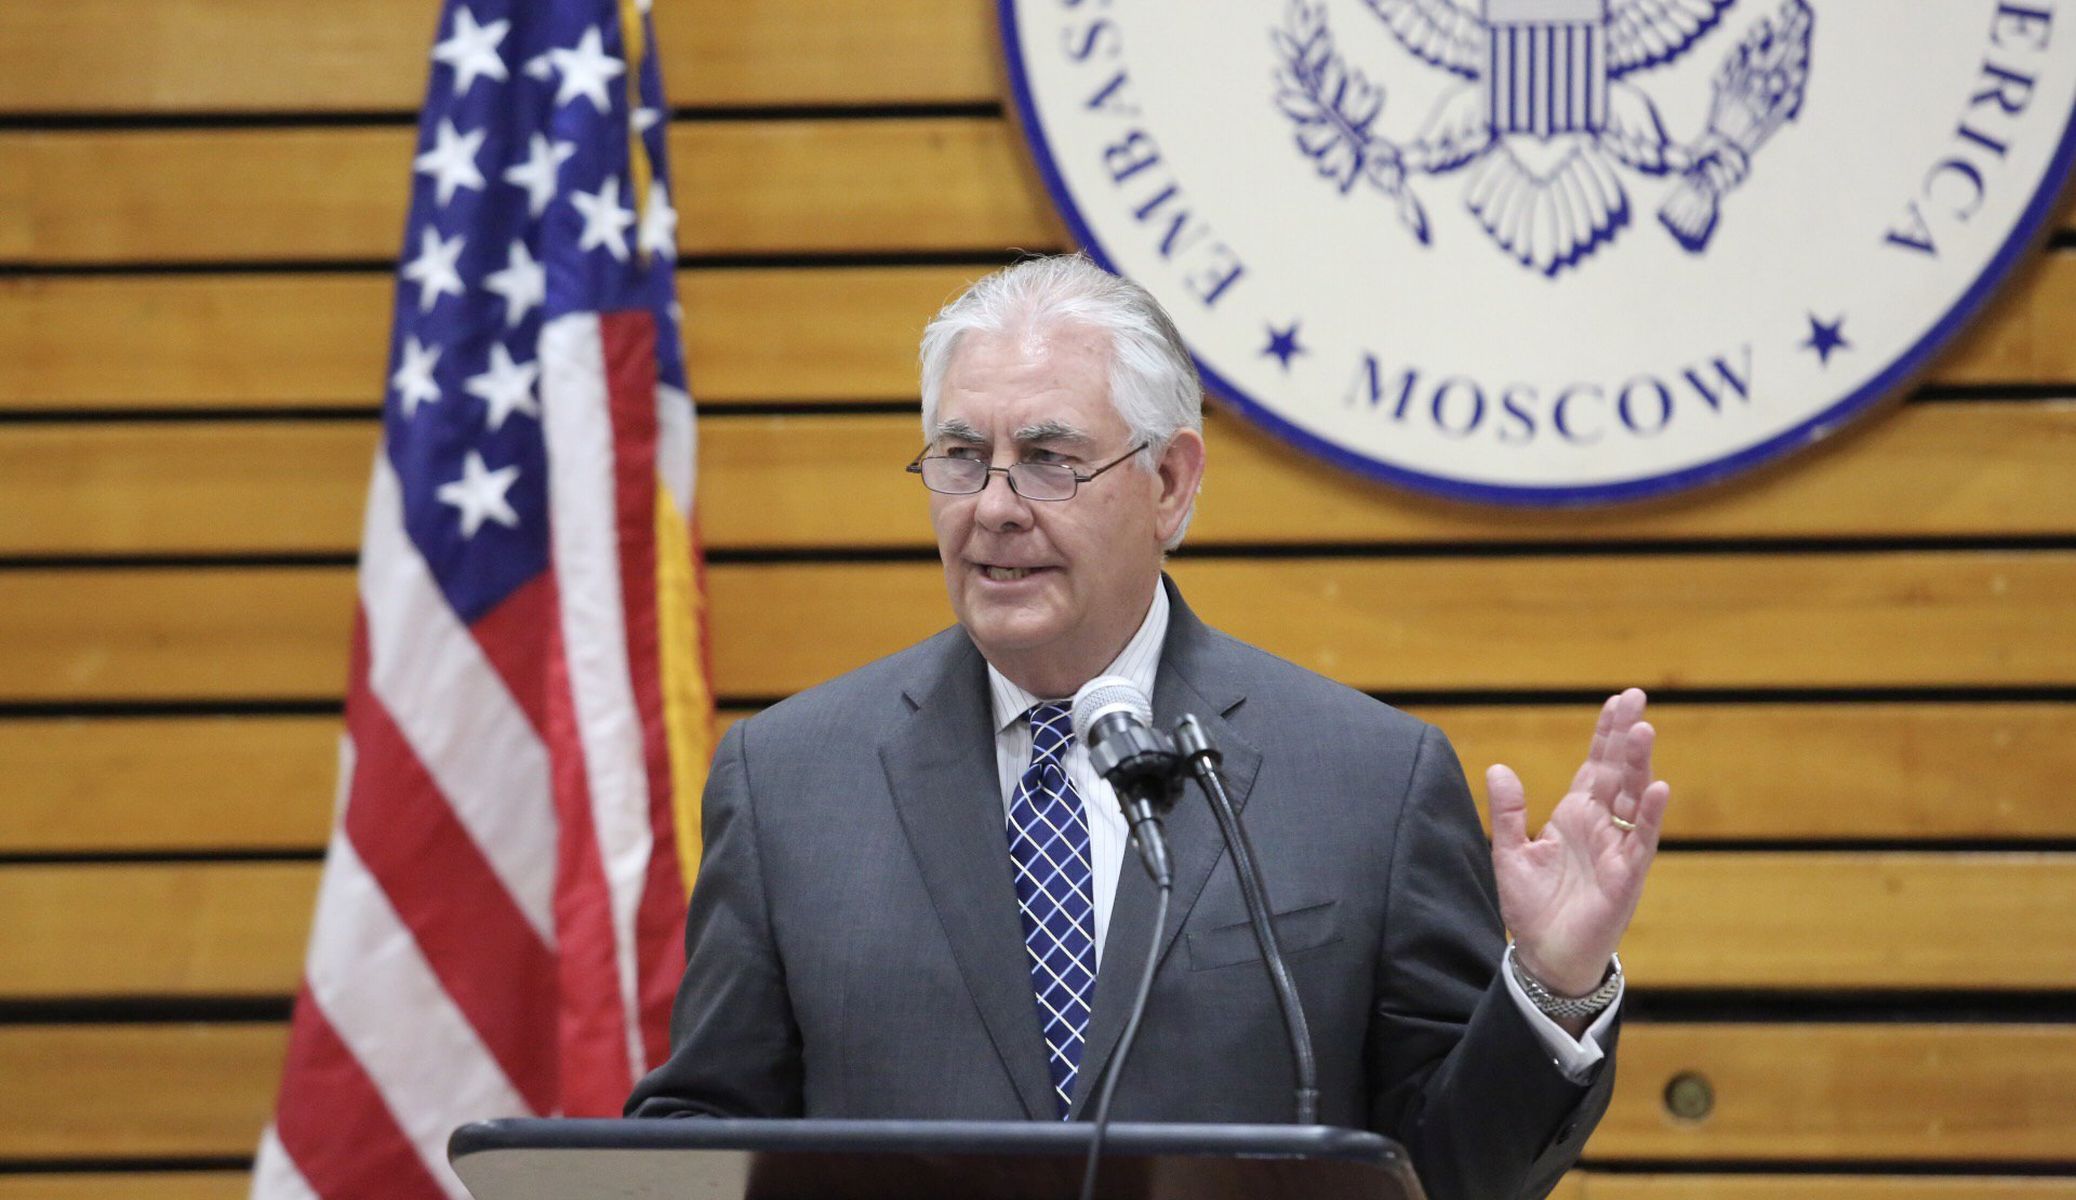 epa05903234 A handout photo made available by the US Department of State shows US Secretary of State Rex Tillerson addressing colleagues and their families at the US Embassy in Moscow, Russia, 11 April 2017. Others are not identified. Rex Tillerson, who attended a G7 Foreign Ministers meeting on Syria in Lucca, Italy, the previous days, arrived in the Russian capital for a two-days working visit during which he is exspected to meet his Russian counterpart and to hold talks on solving the situation in Syria.  EPA/US DEPARTMENT OF STATE HANDOUT  HANDOUT EDITORIAL USE ONLY